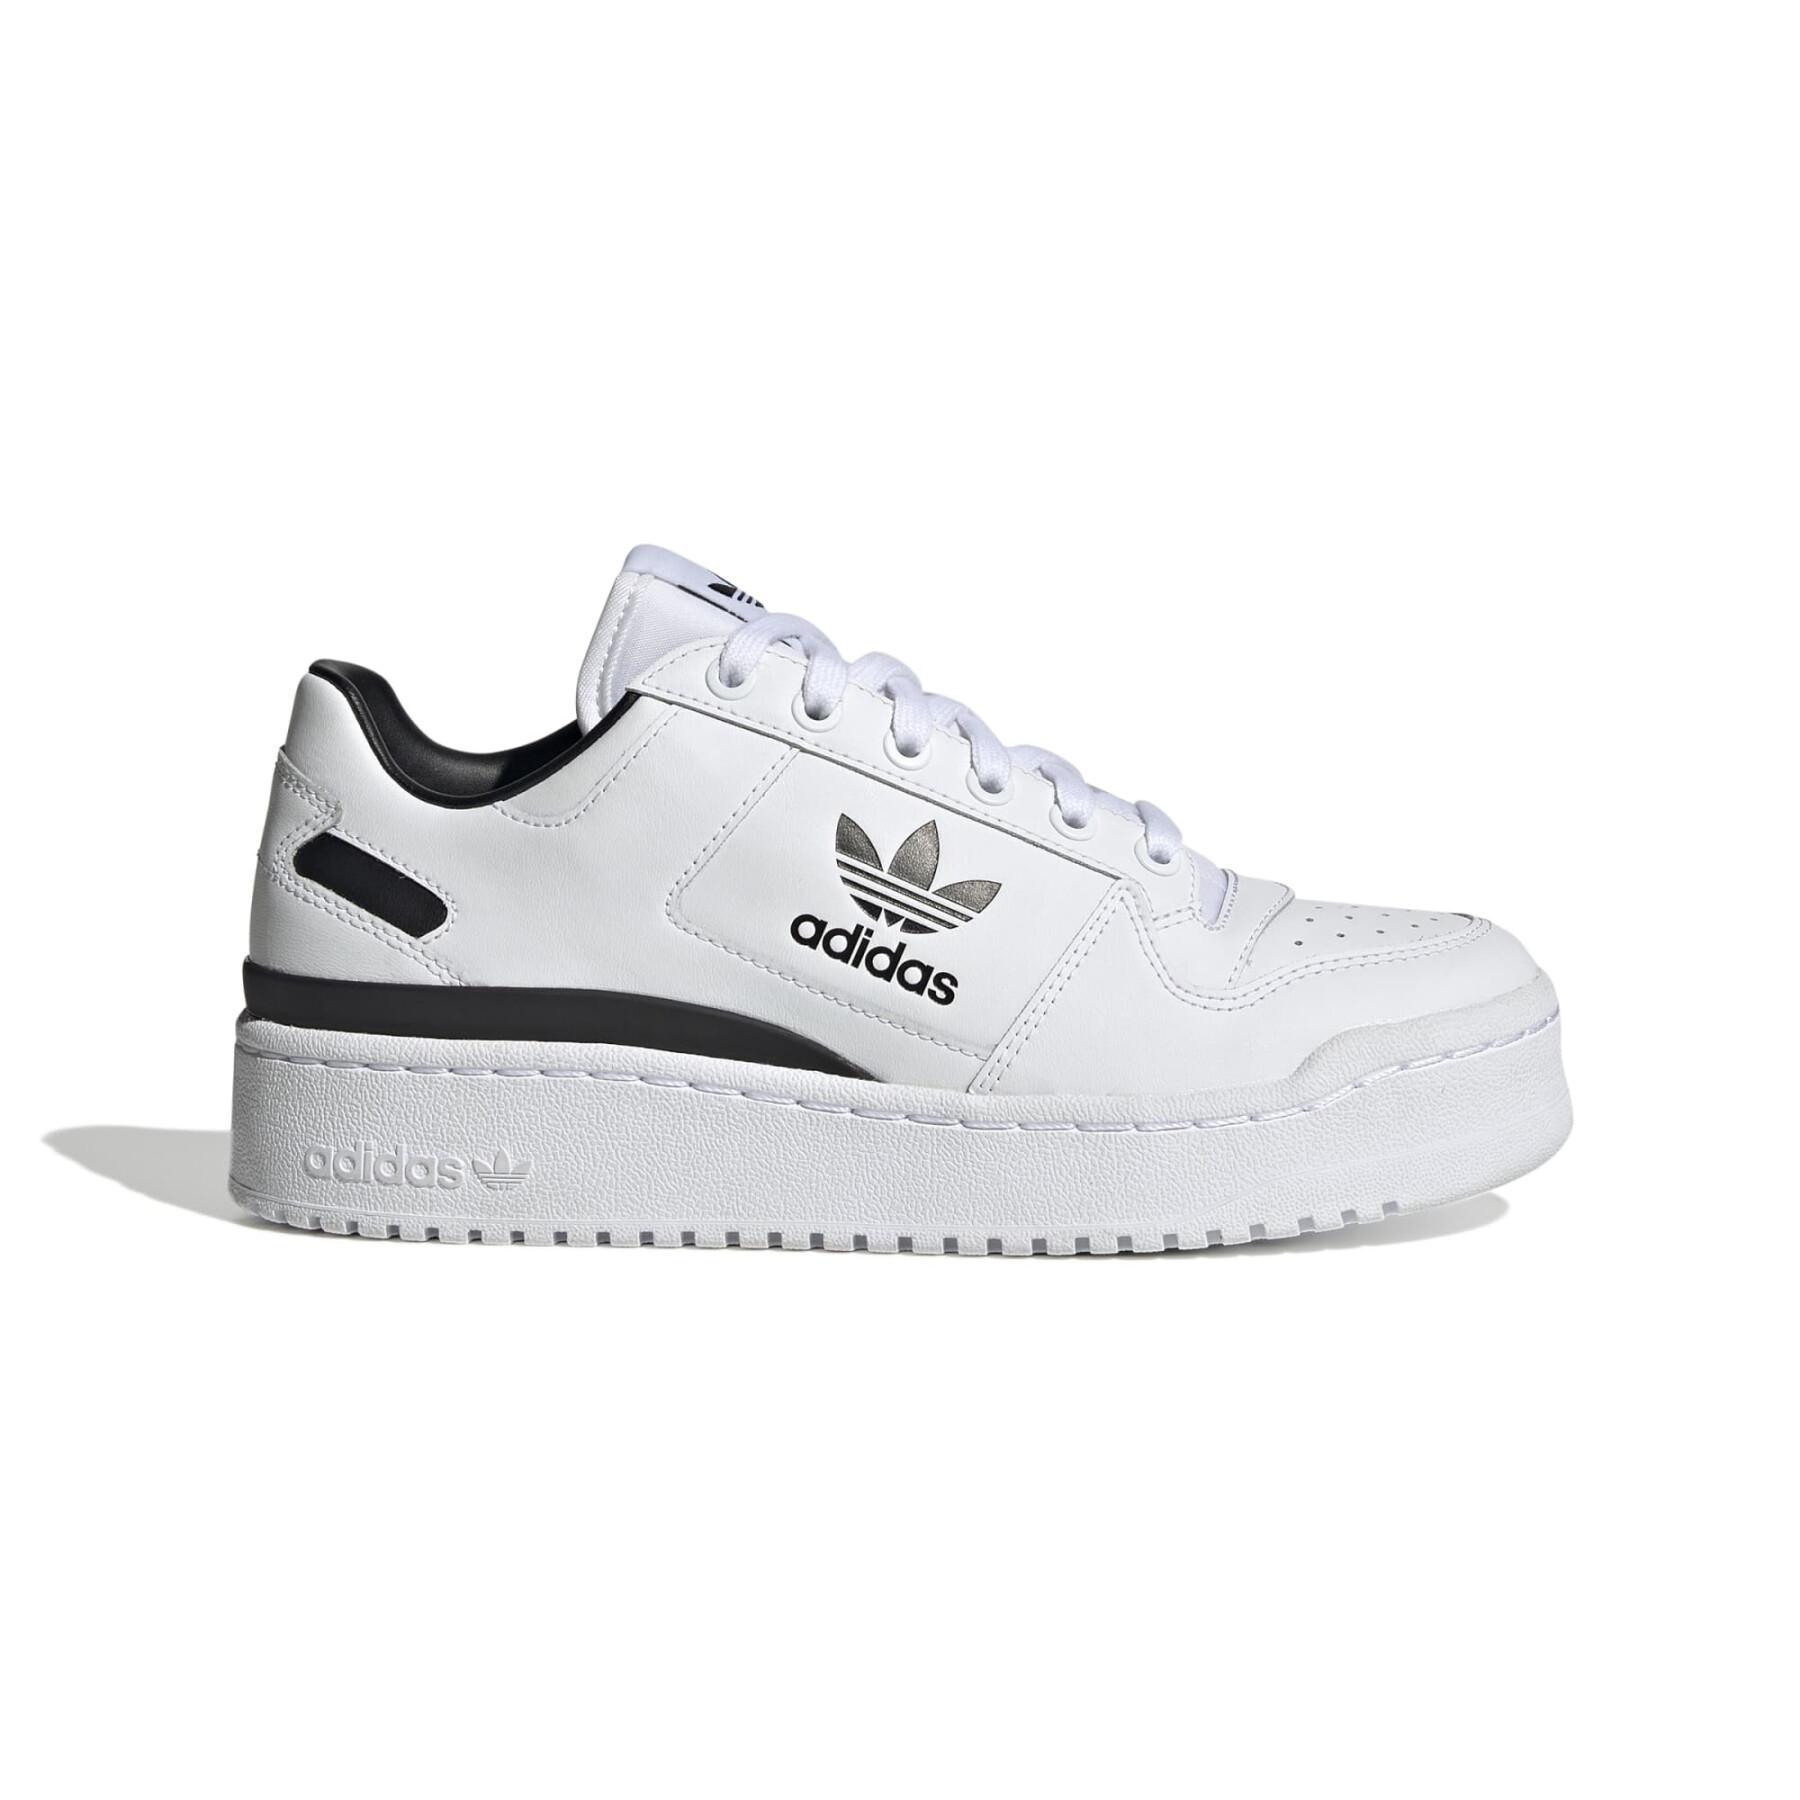 https://media.madeinparadis.com/catalog/product/cache/image/1800x/9df78eab33525d08d6e5fb8d27136e95/a/d/adidas-originals_gy5921_1_footwear_photography_side_lateral_center_view_white.jpg